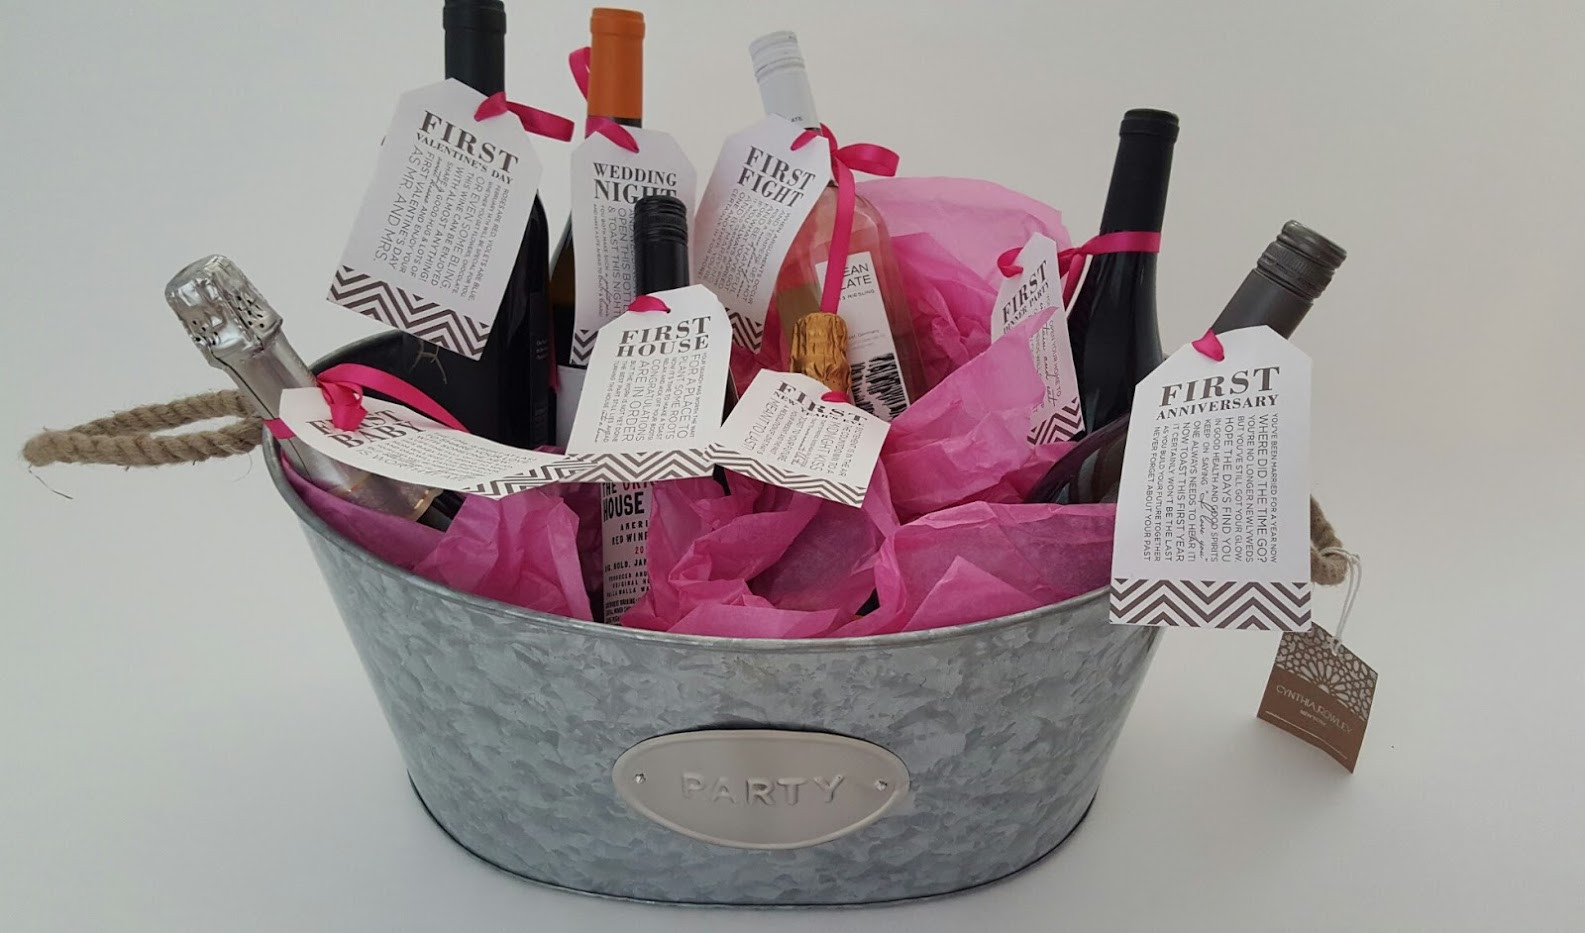 Wedding Shower Gift Baskets Ideas
 Bridal Shower Gift DIY to Try A Basket of “Firsts” for